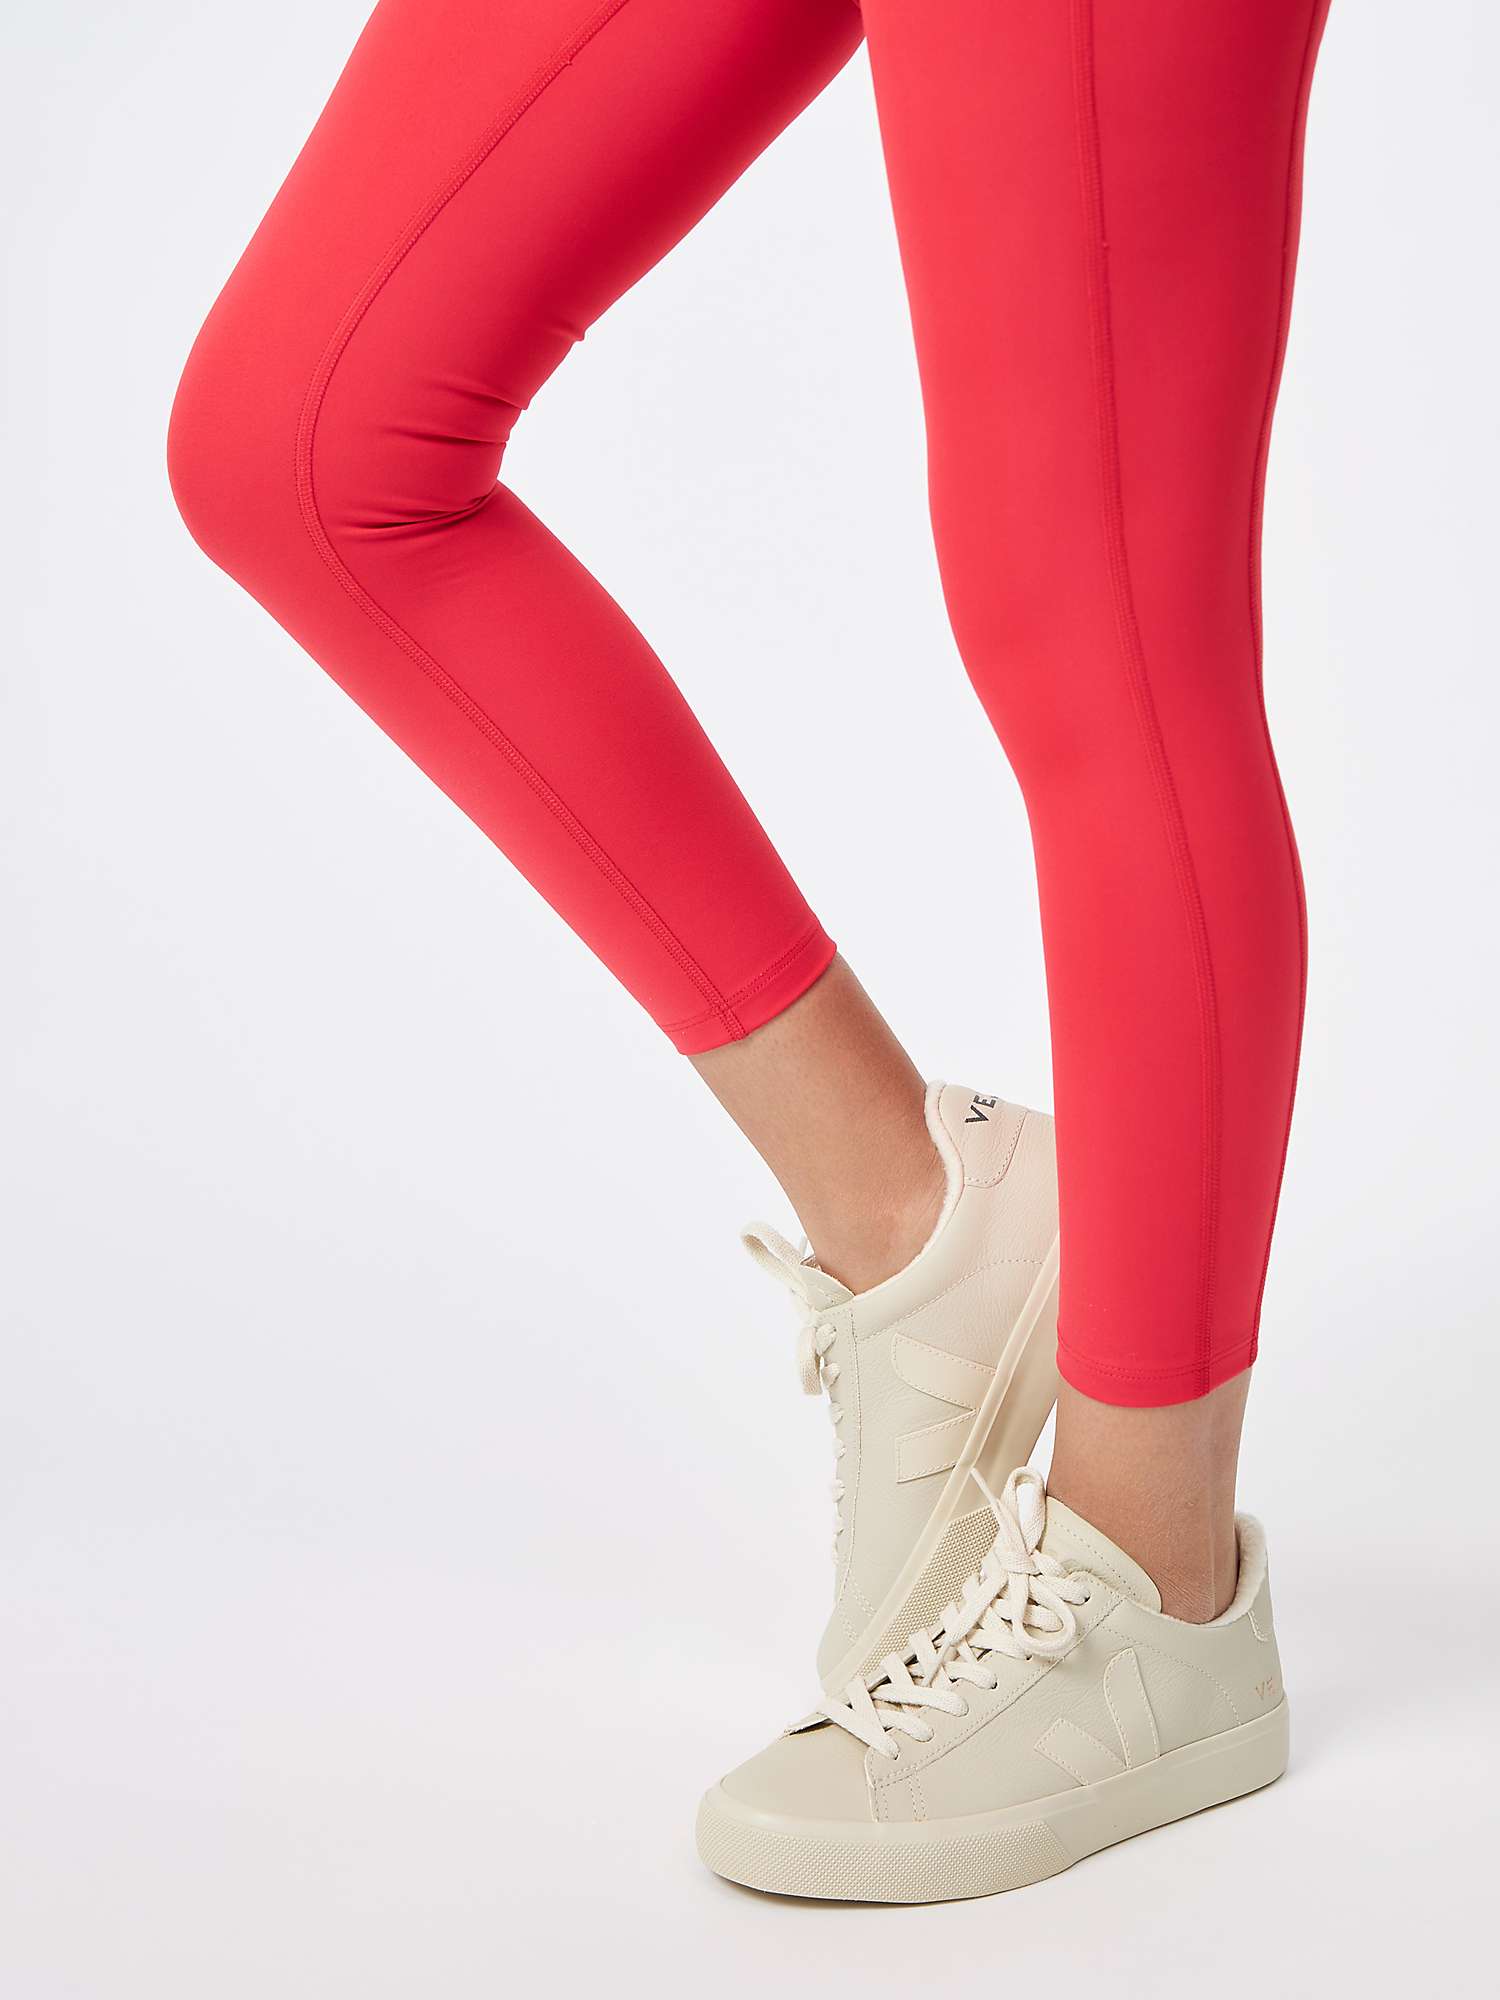 Buy Girlfriend Collective Compressive High Rise 7/8 Leggings Online at johnlewis.com